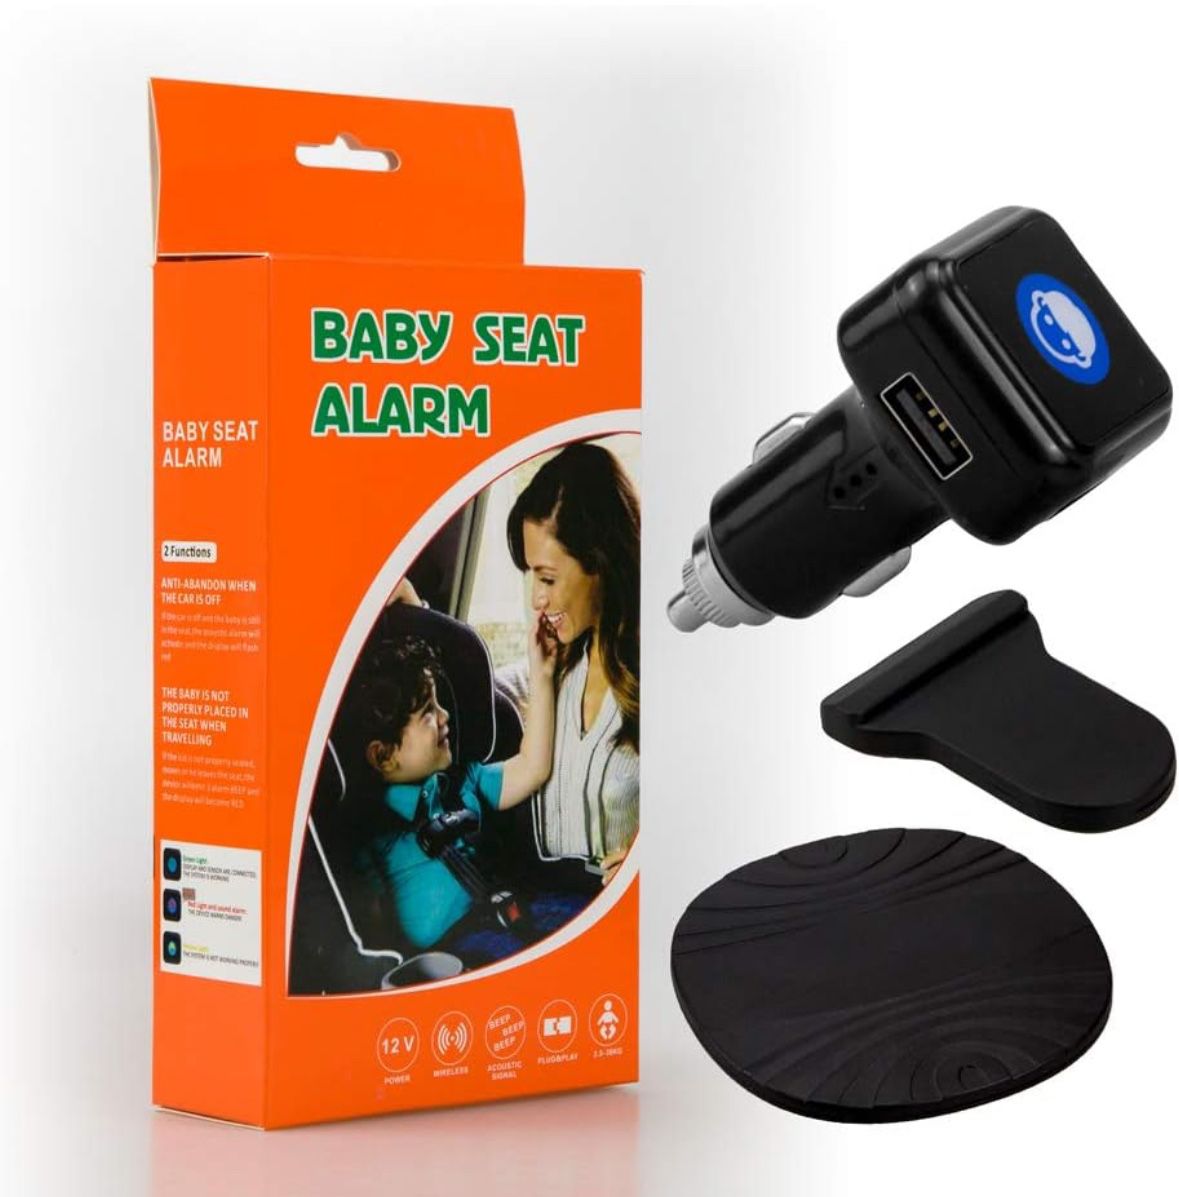 Baby Car Seat alarm Reminder meets the requirements specified in Regulation 83D